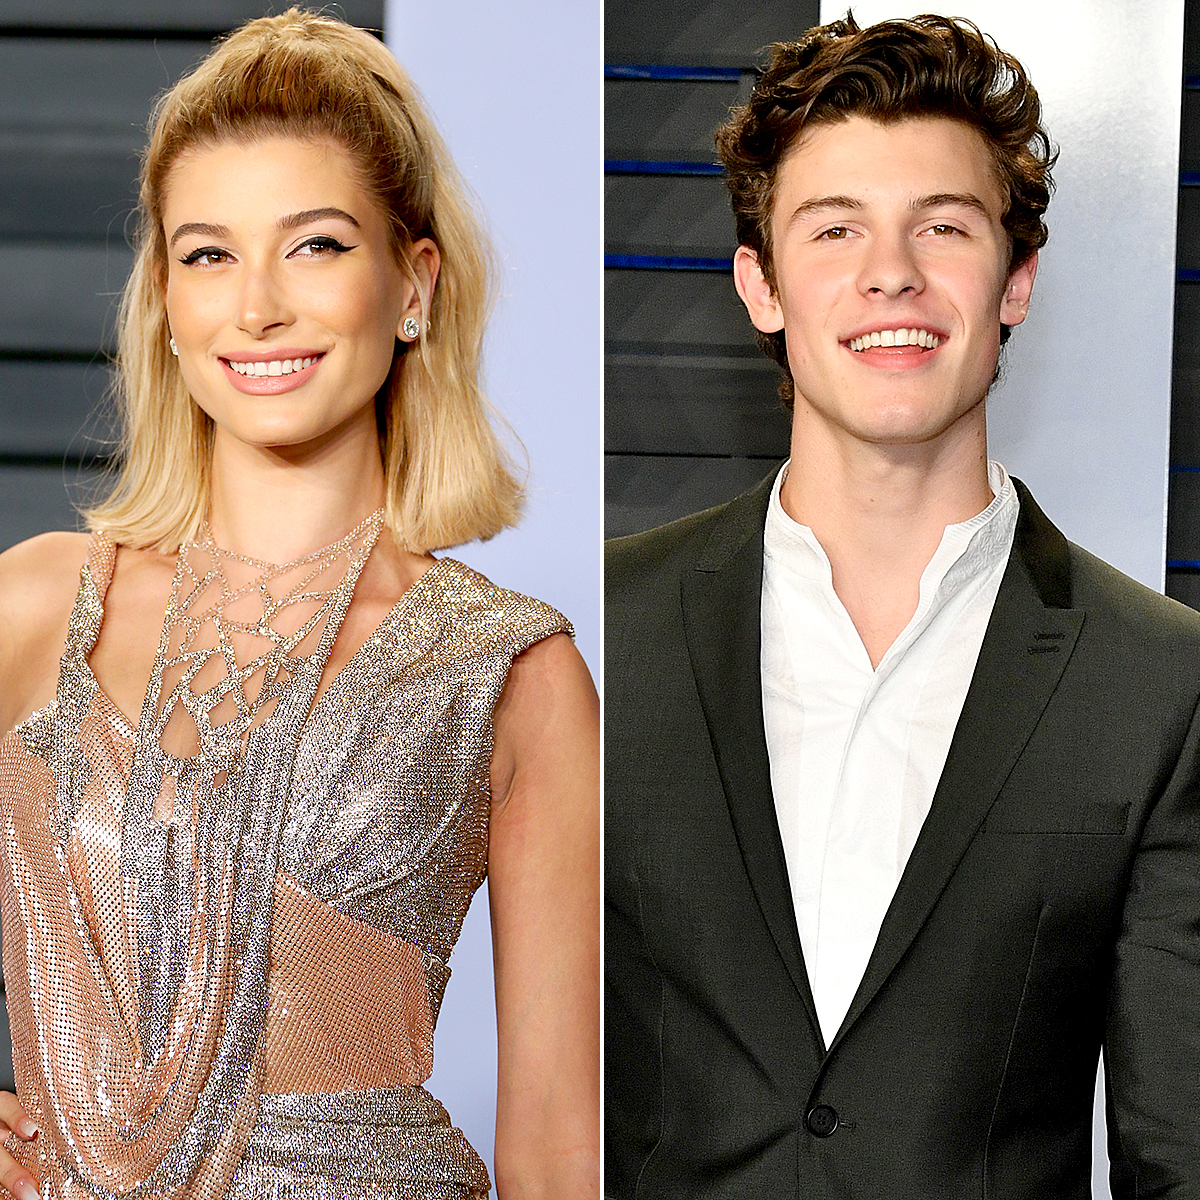 Hailey Baldwin Says Shes Single After Shawn Mendes Romance